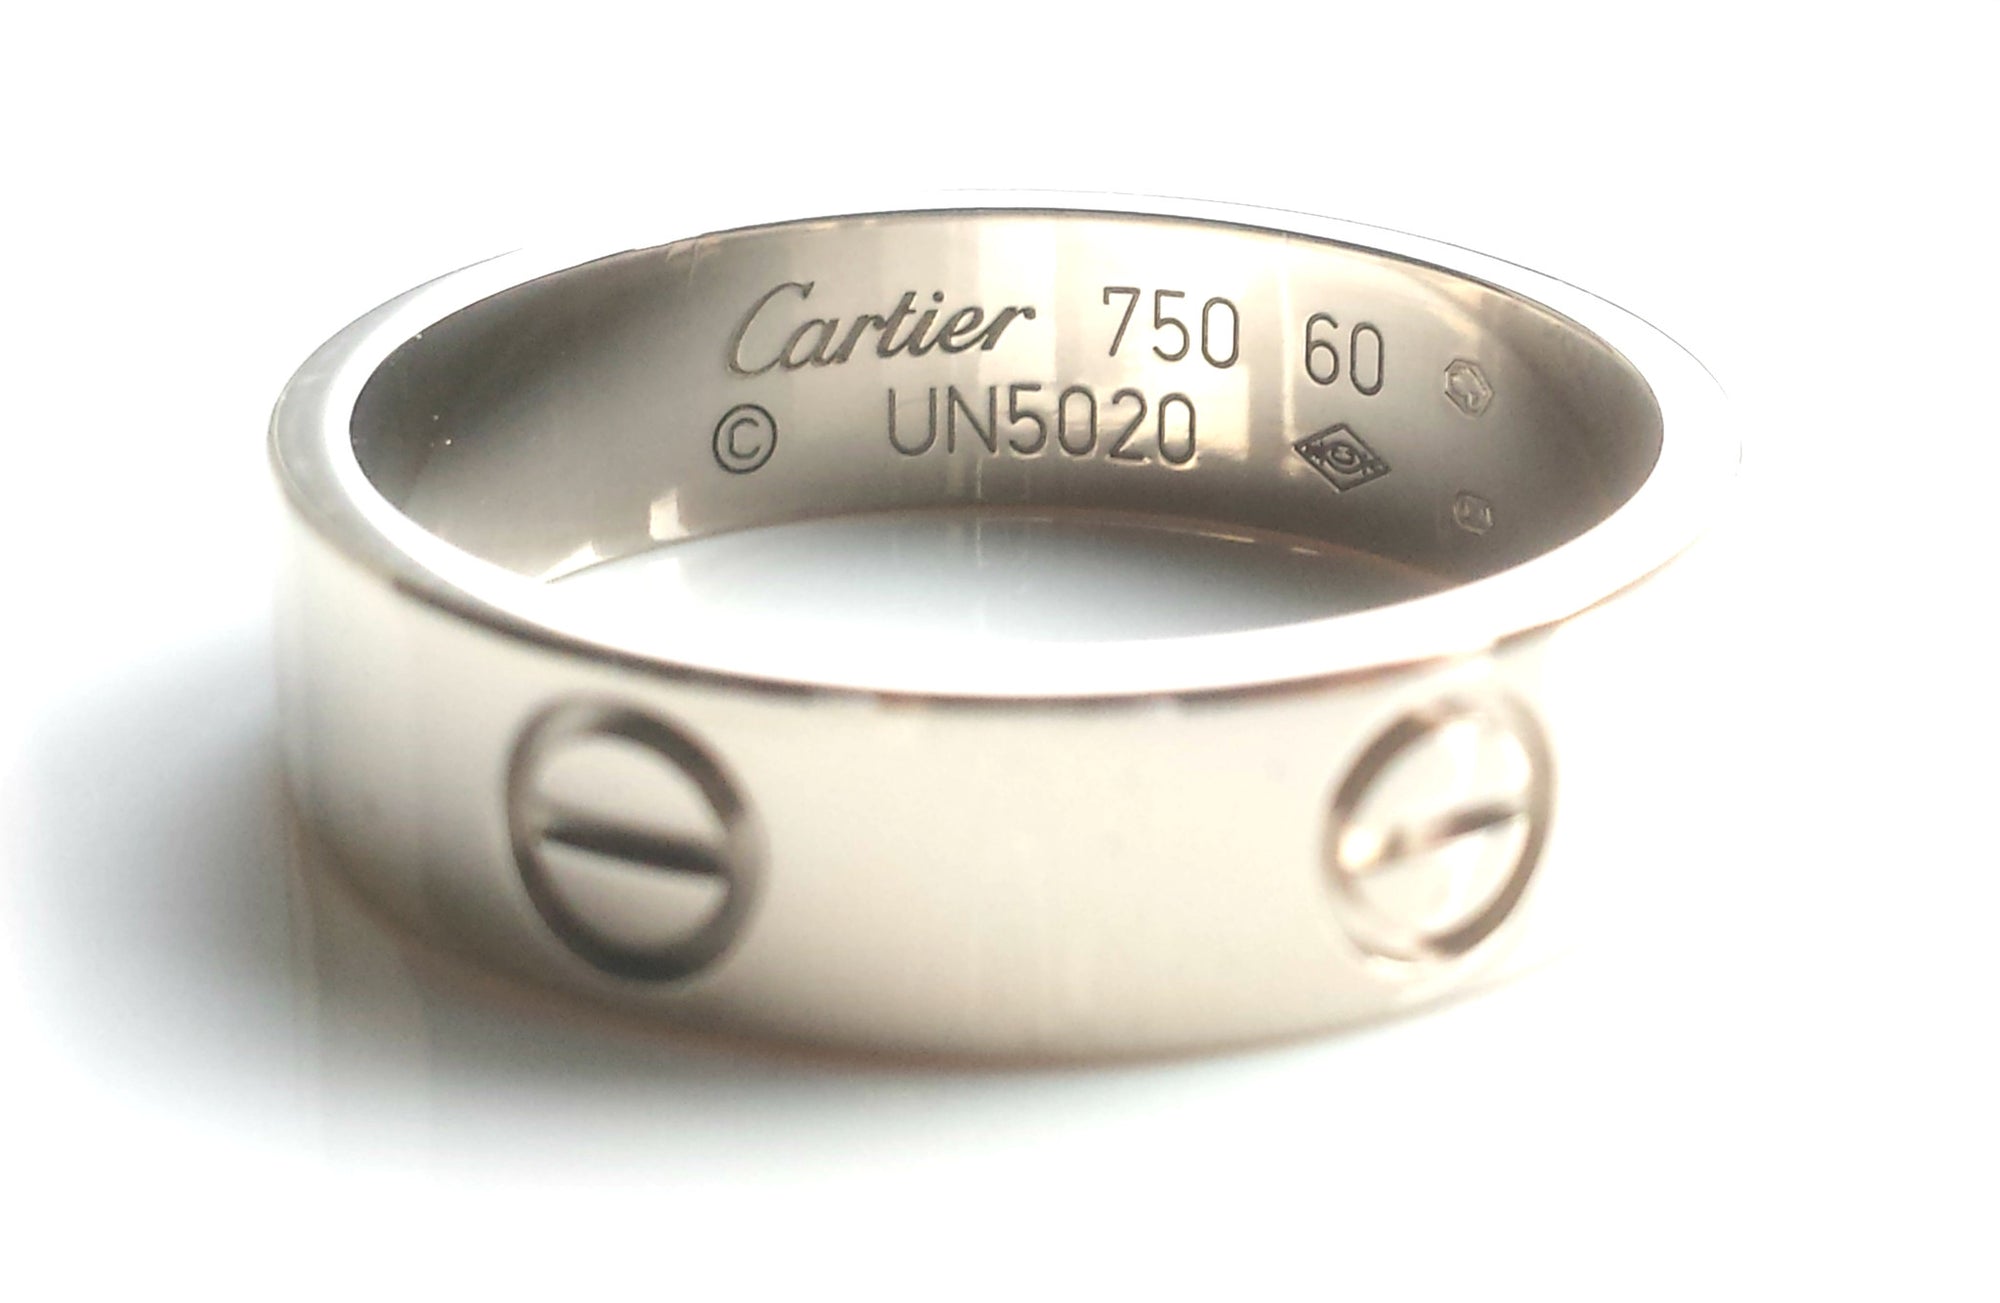 Cartier Love Ring / Wedding Band in 18k White Gold, 5.5mm wide, size 60